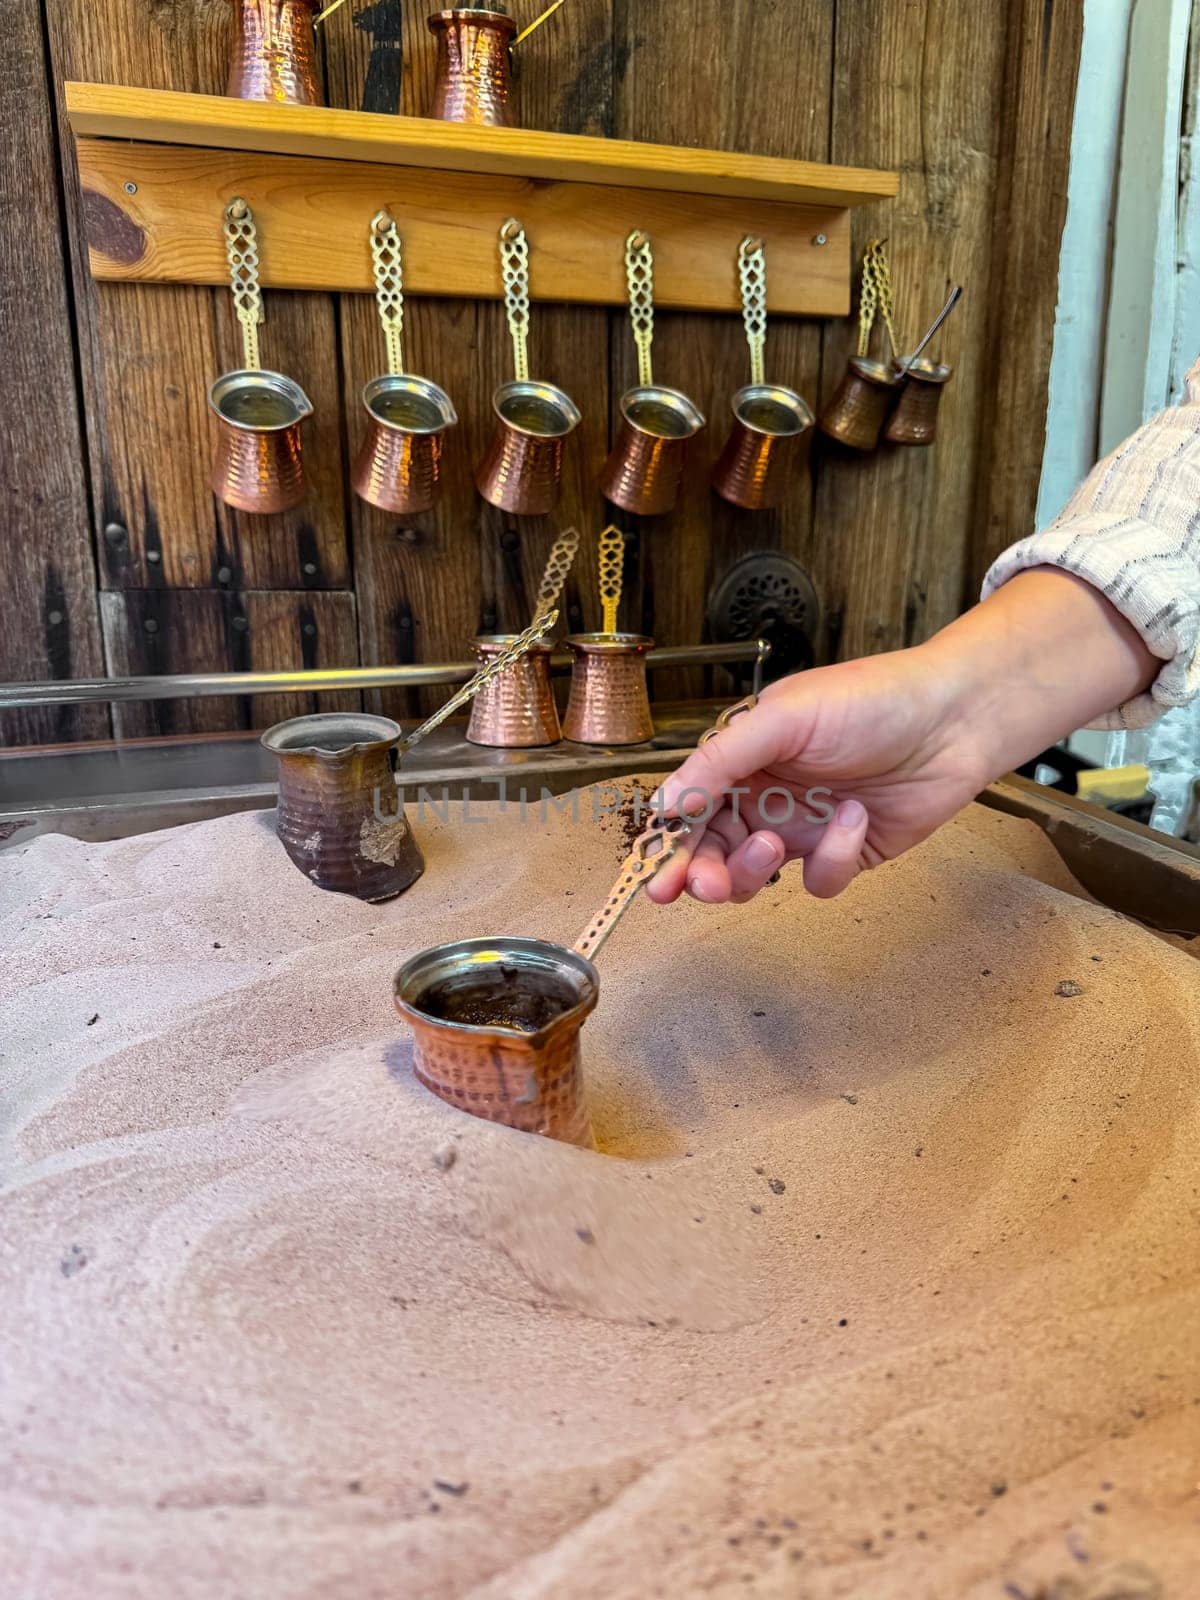 Preparing Turkish coffee in traditional copper pot on sandy stove, with hand holding the handle, copper cezves and wooden wall rack in the background. Turkish coffee culture concept. by Lunnica